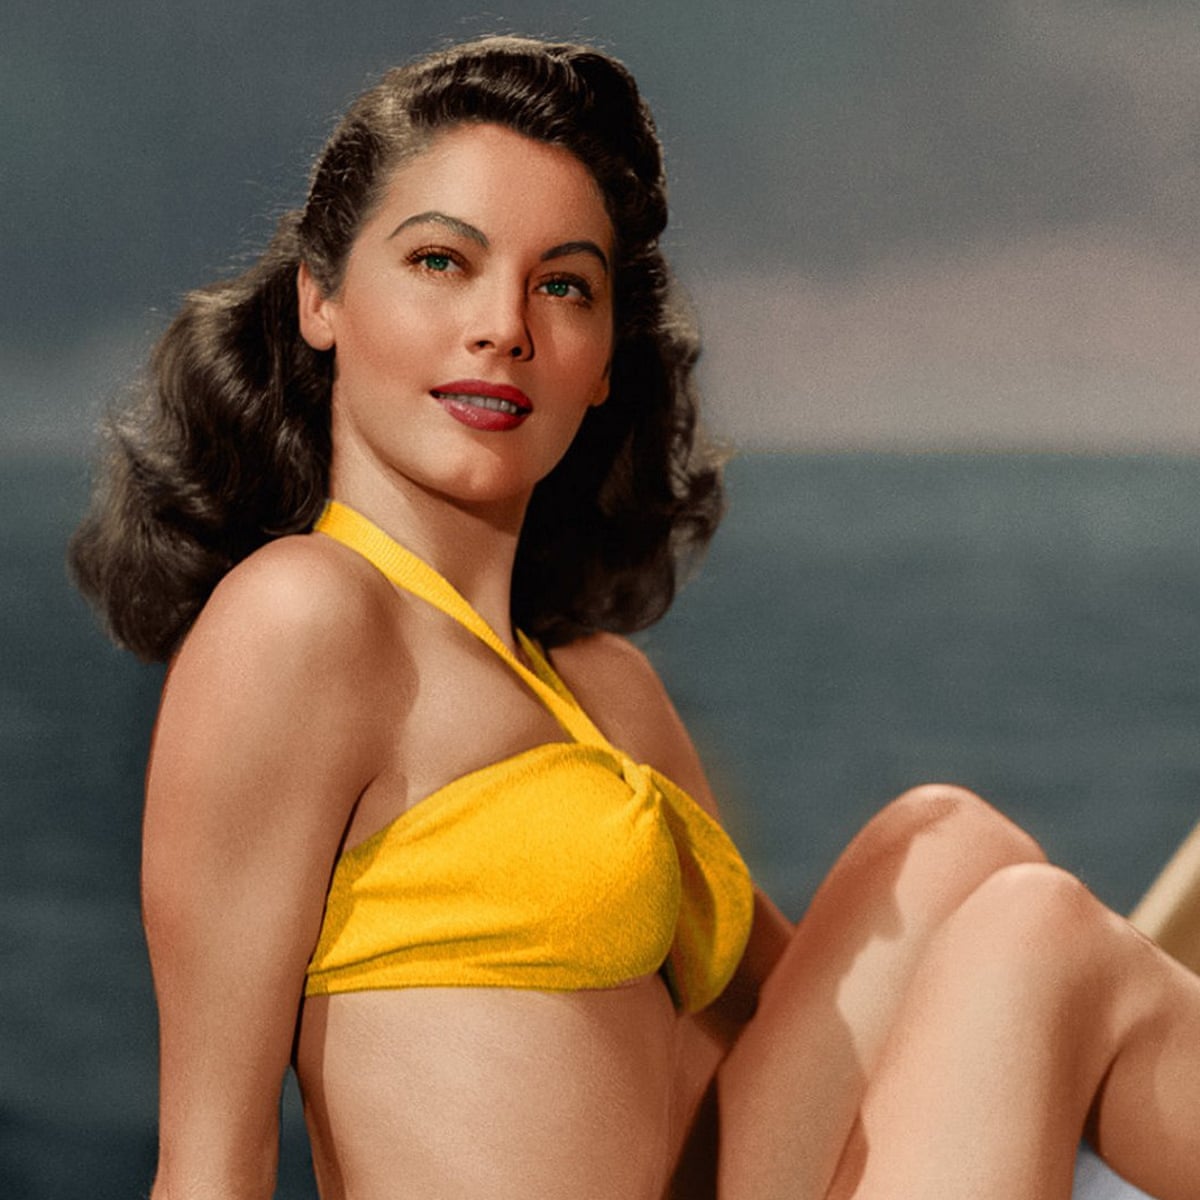 Flirting with Ava Gardner | Life and style | The Guardian